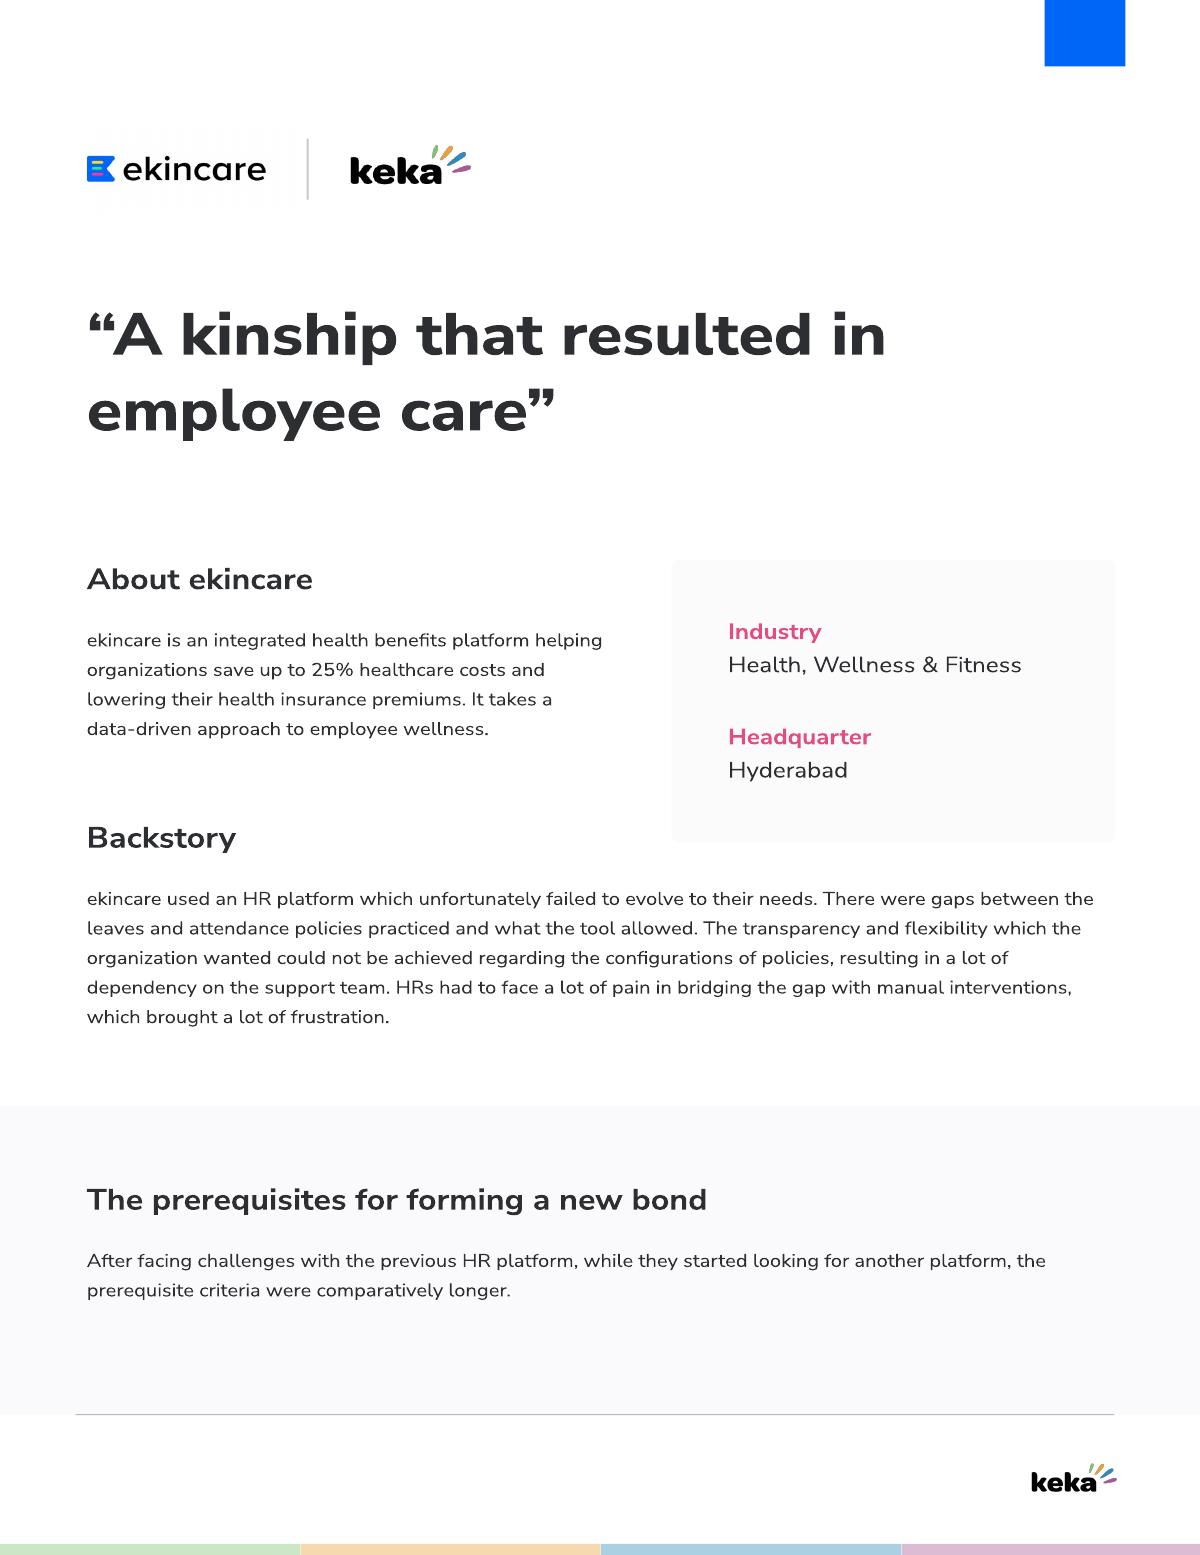 A kinship that resulted in employee care